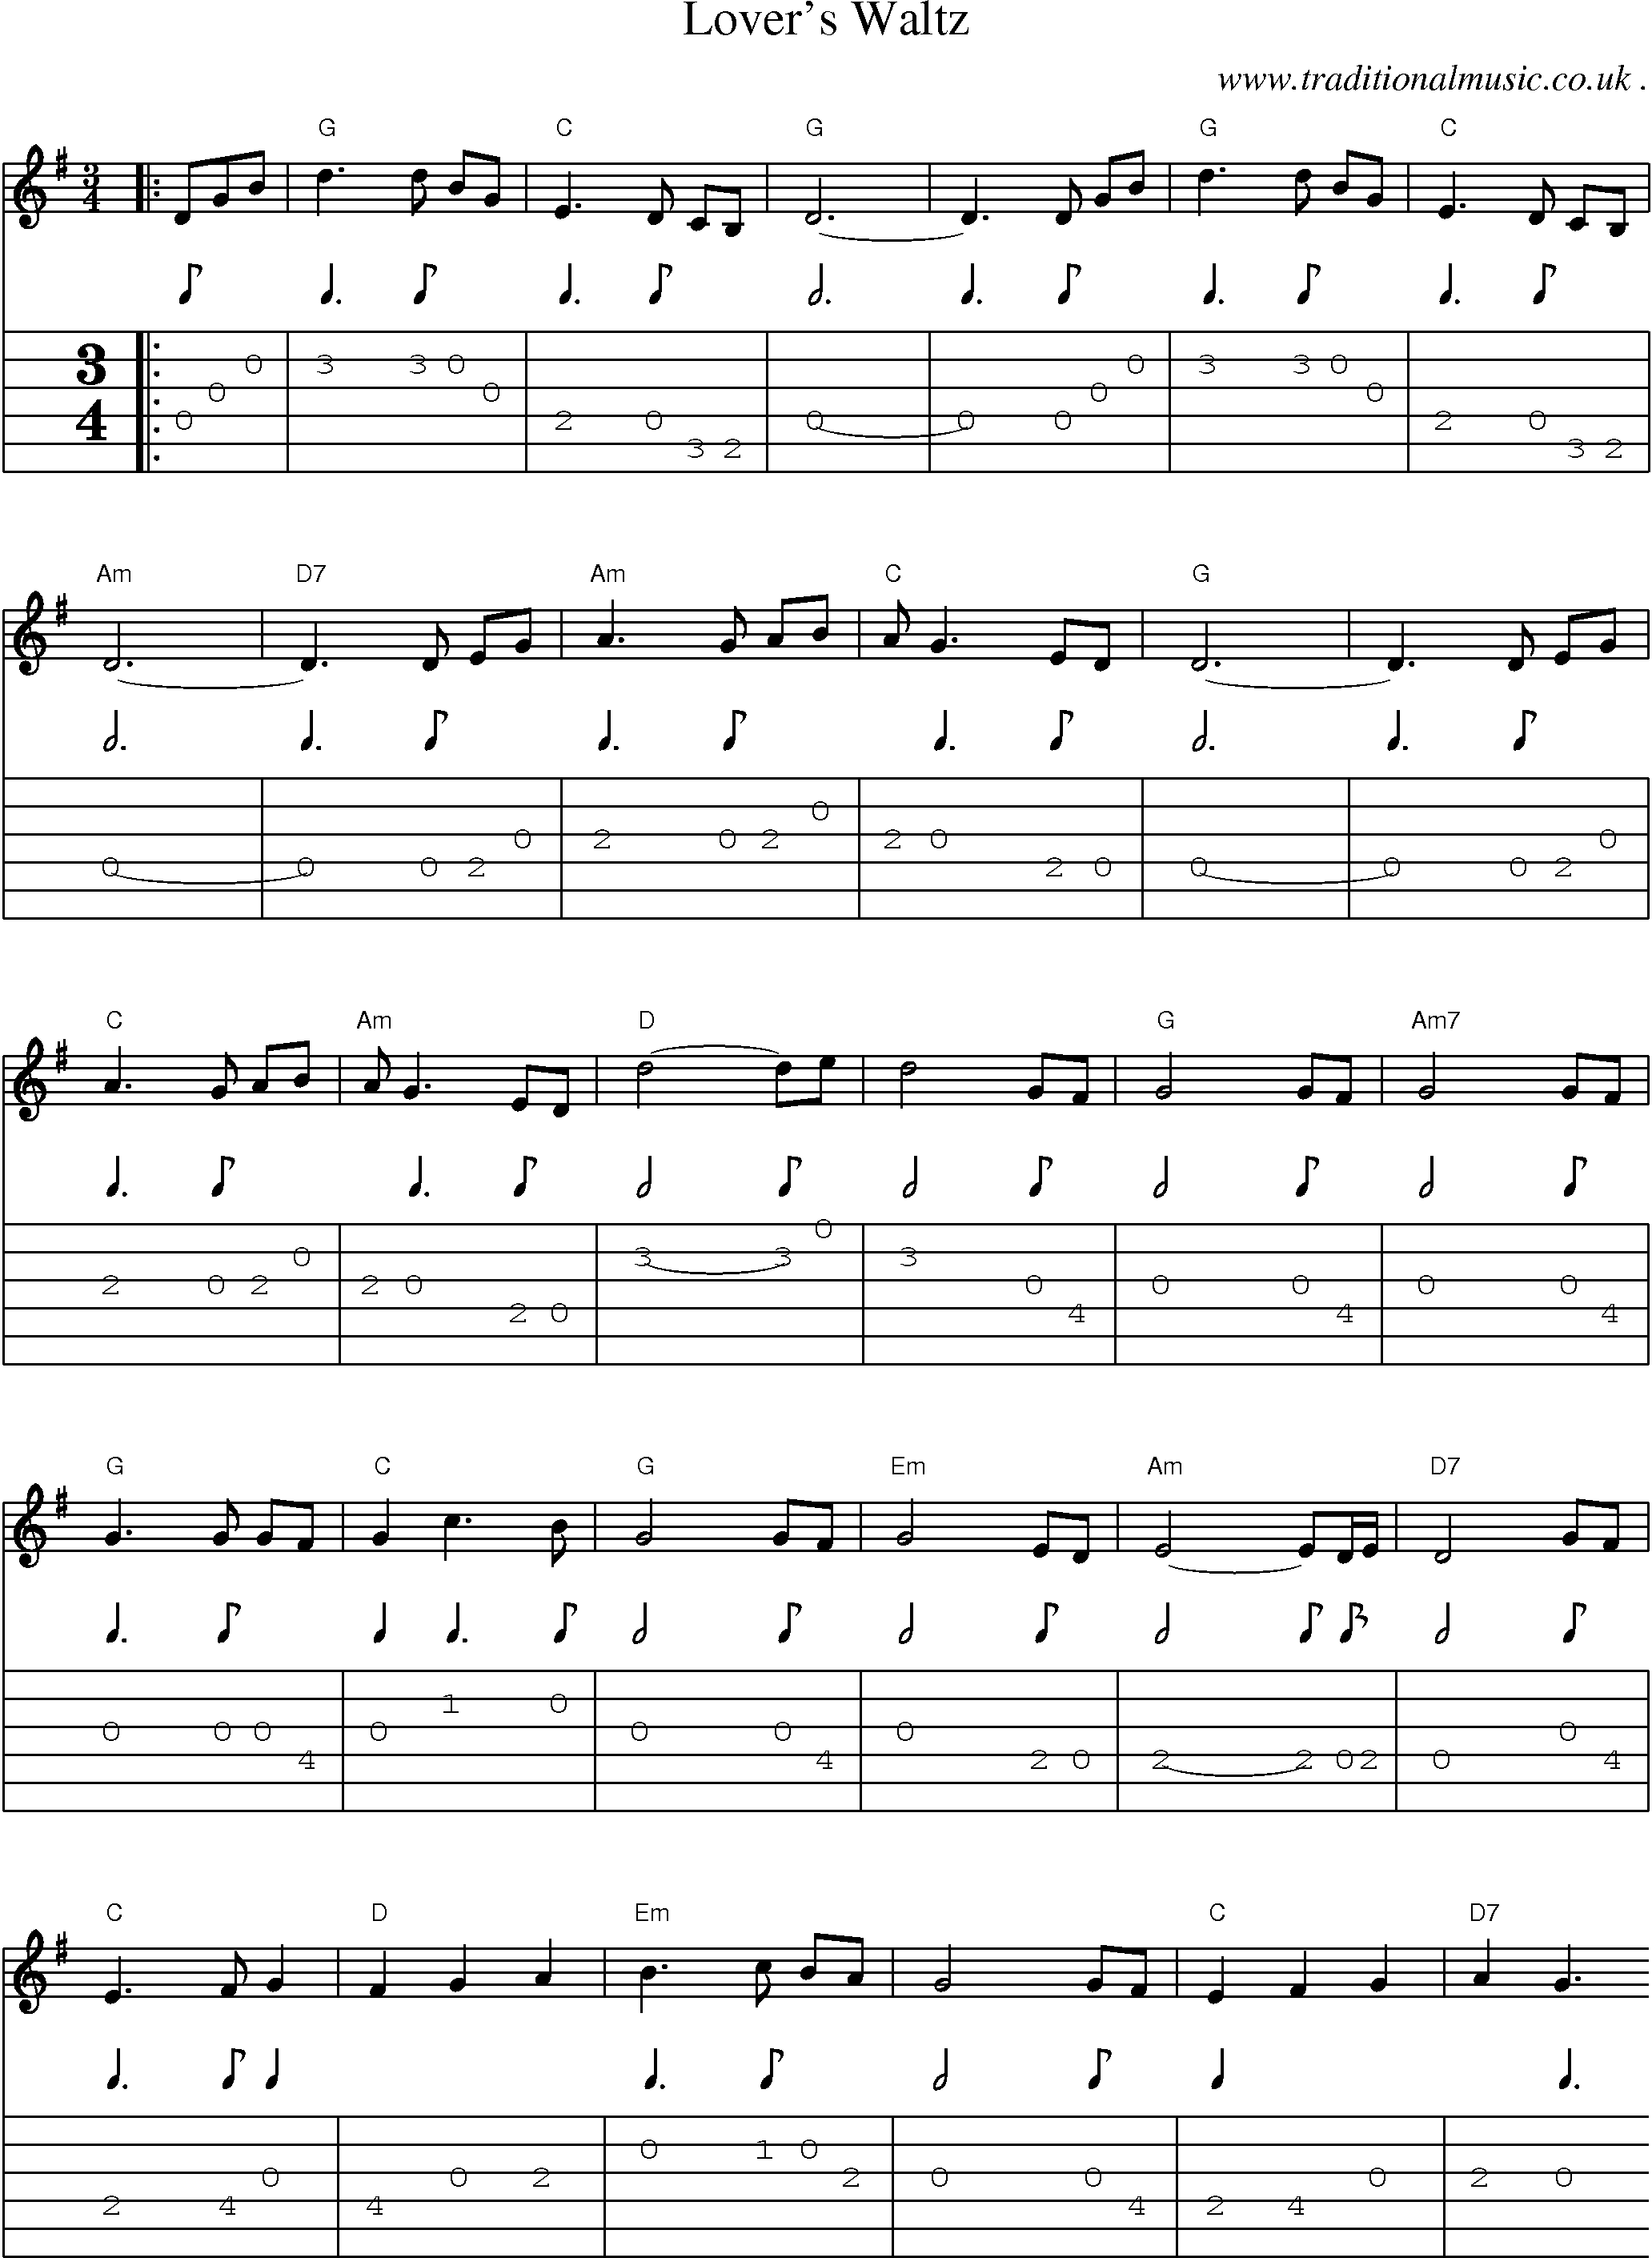 Music Score and Guitar Tabs for Lovers Waltz